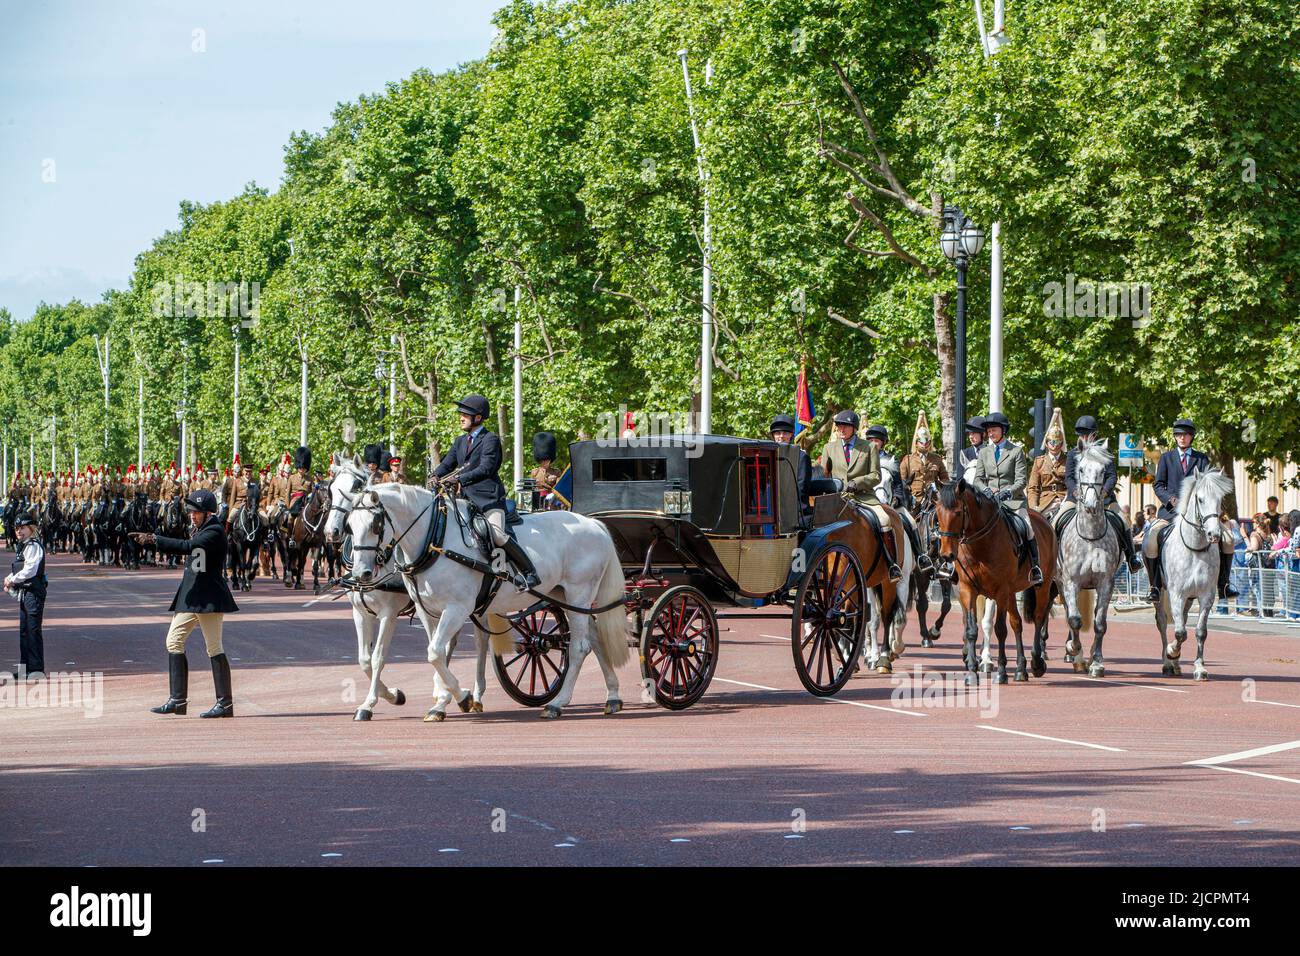 Queens Household Cavalry riding horses escorting a royal carriage along the Mall rehearsing for Trooping the Colour in London, England, United Kingdom Stock Photo